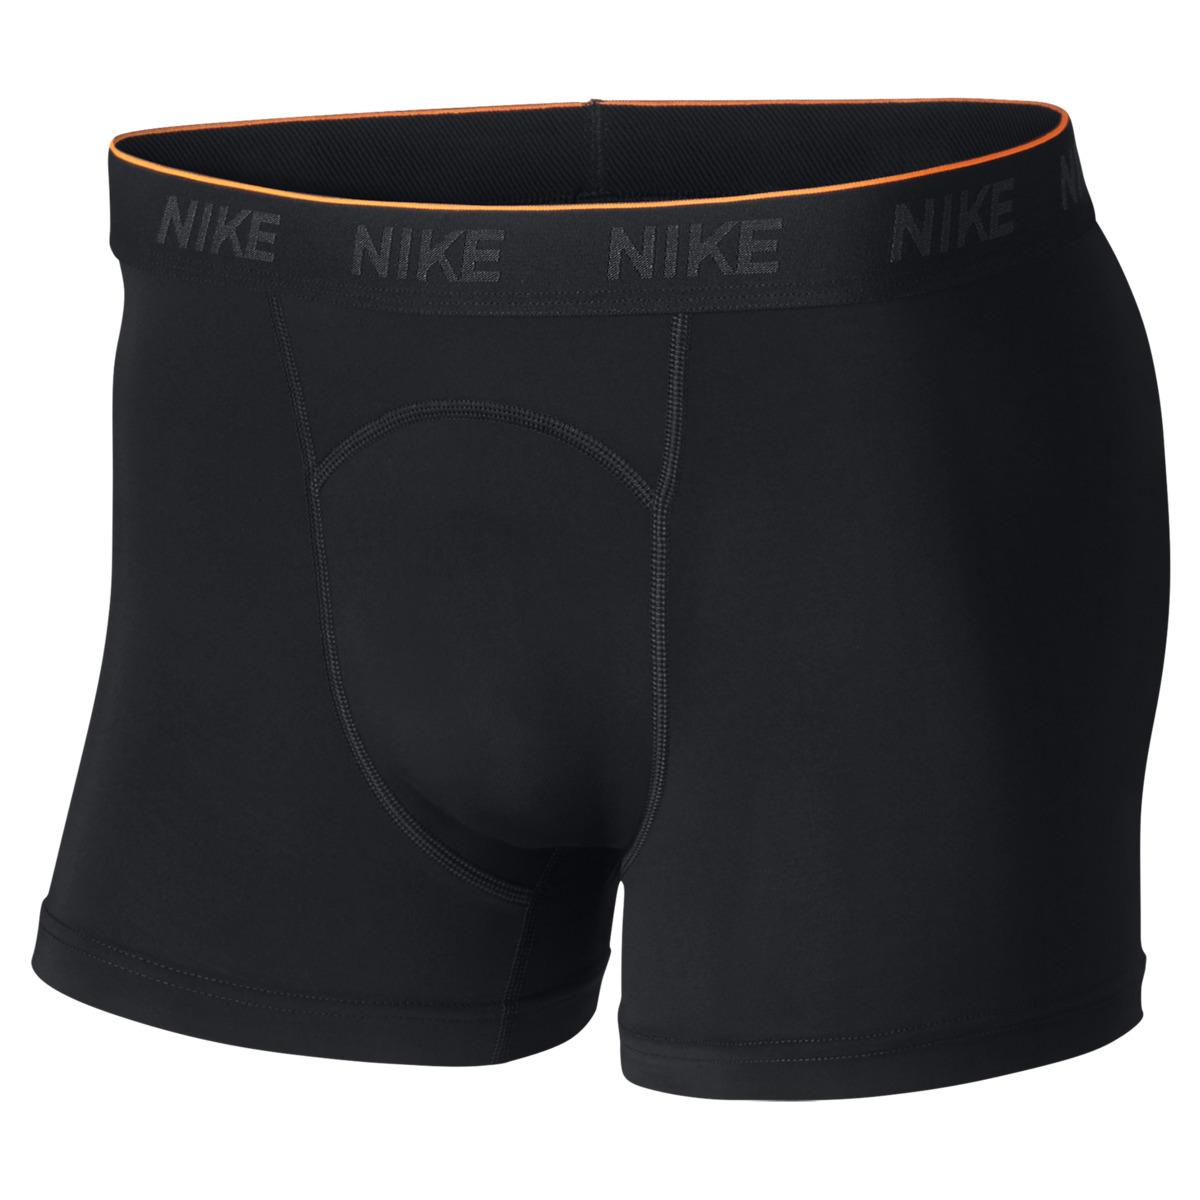 Nike Synthetic 2-pack Of Boxer Shorts in Black for Men - Lyst